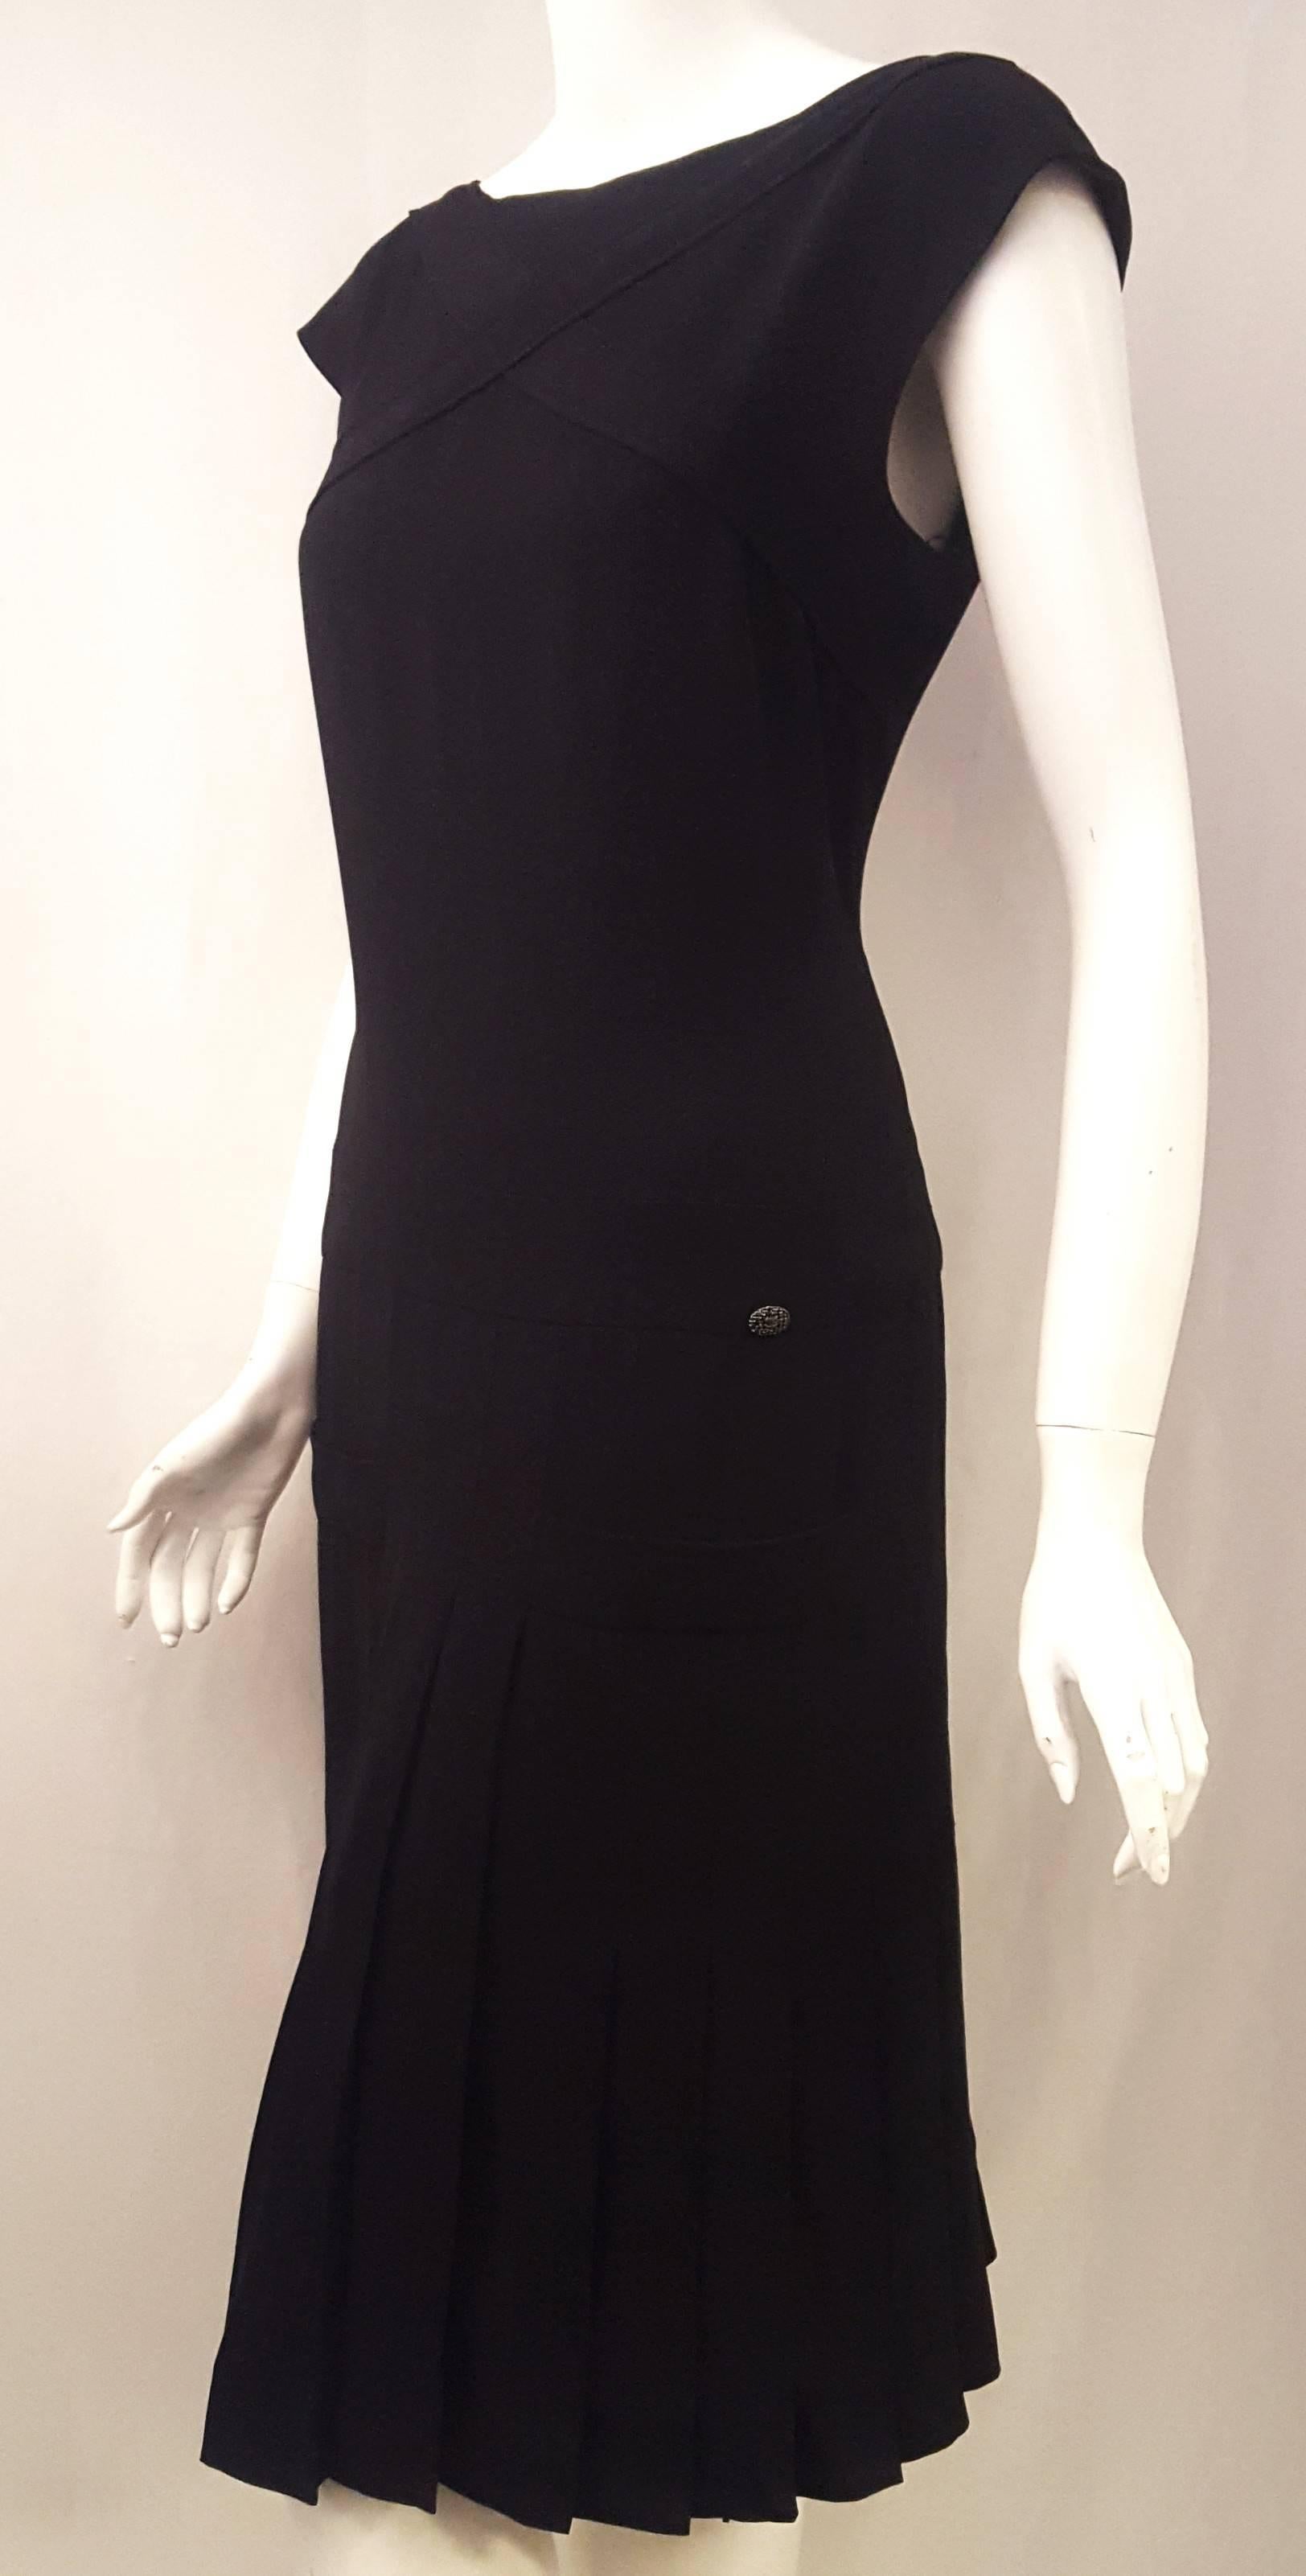 This Chanel black silk dress is a classic.  The top of this dress contains a crisscross detail at the chest and a hidden zipper at the back for closure and features a drop waist and a pleated skirt.  The drop waist is given prominence by a band,